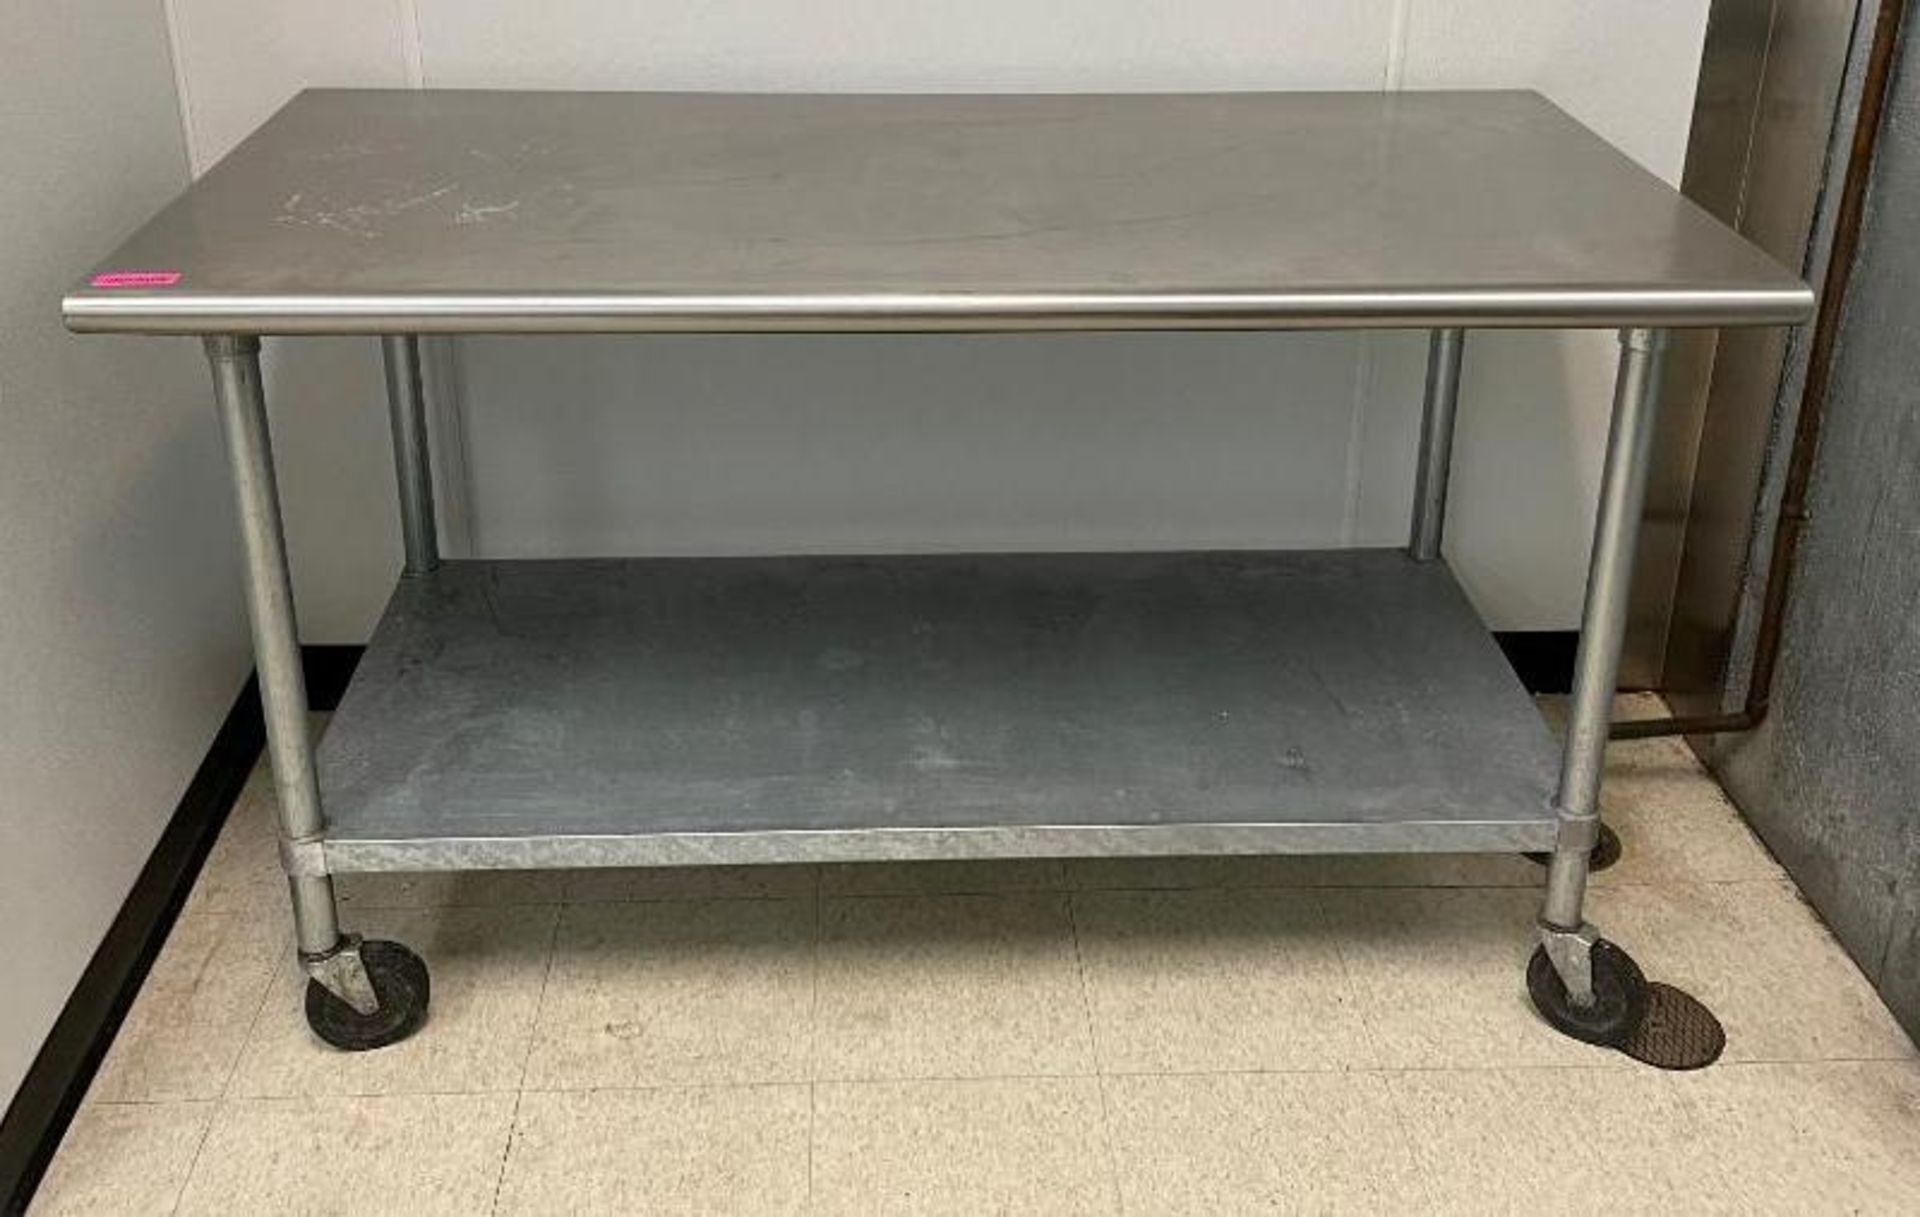 DESCRIPTION: 60" X 30" STAINLESS TABLE W/ UNDER SHELF. ADDITIONAL INFORMATION ON CASTERS. SIZE: 60"